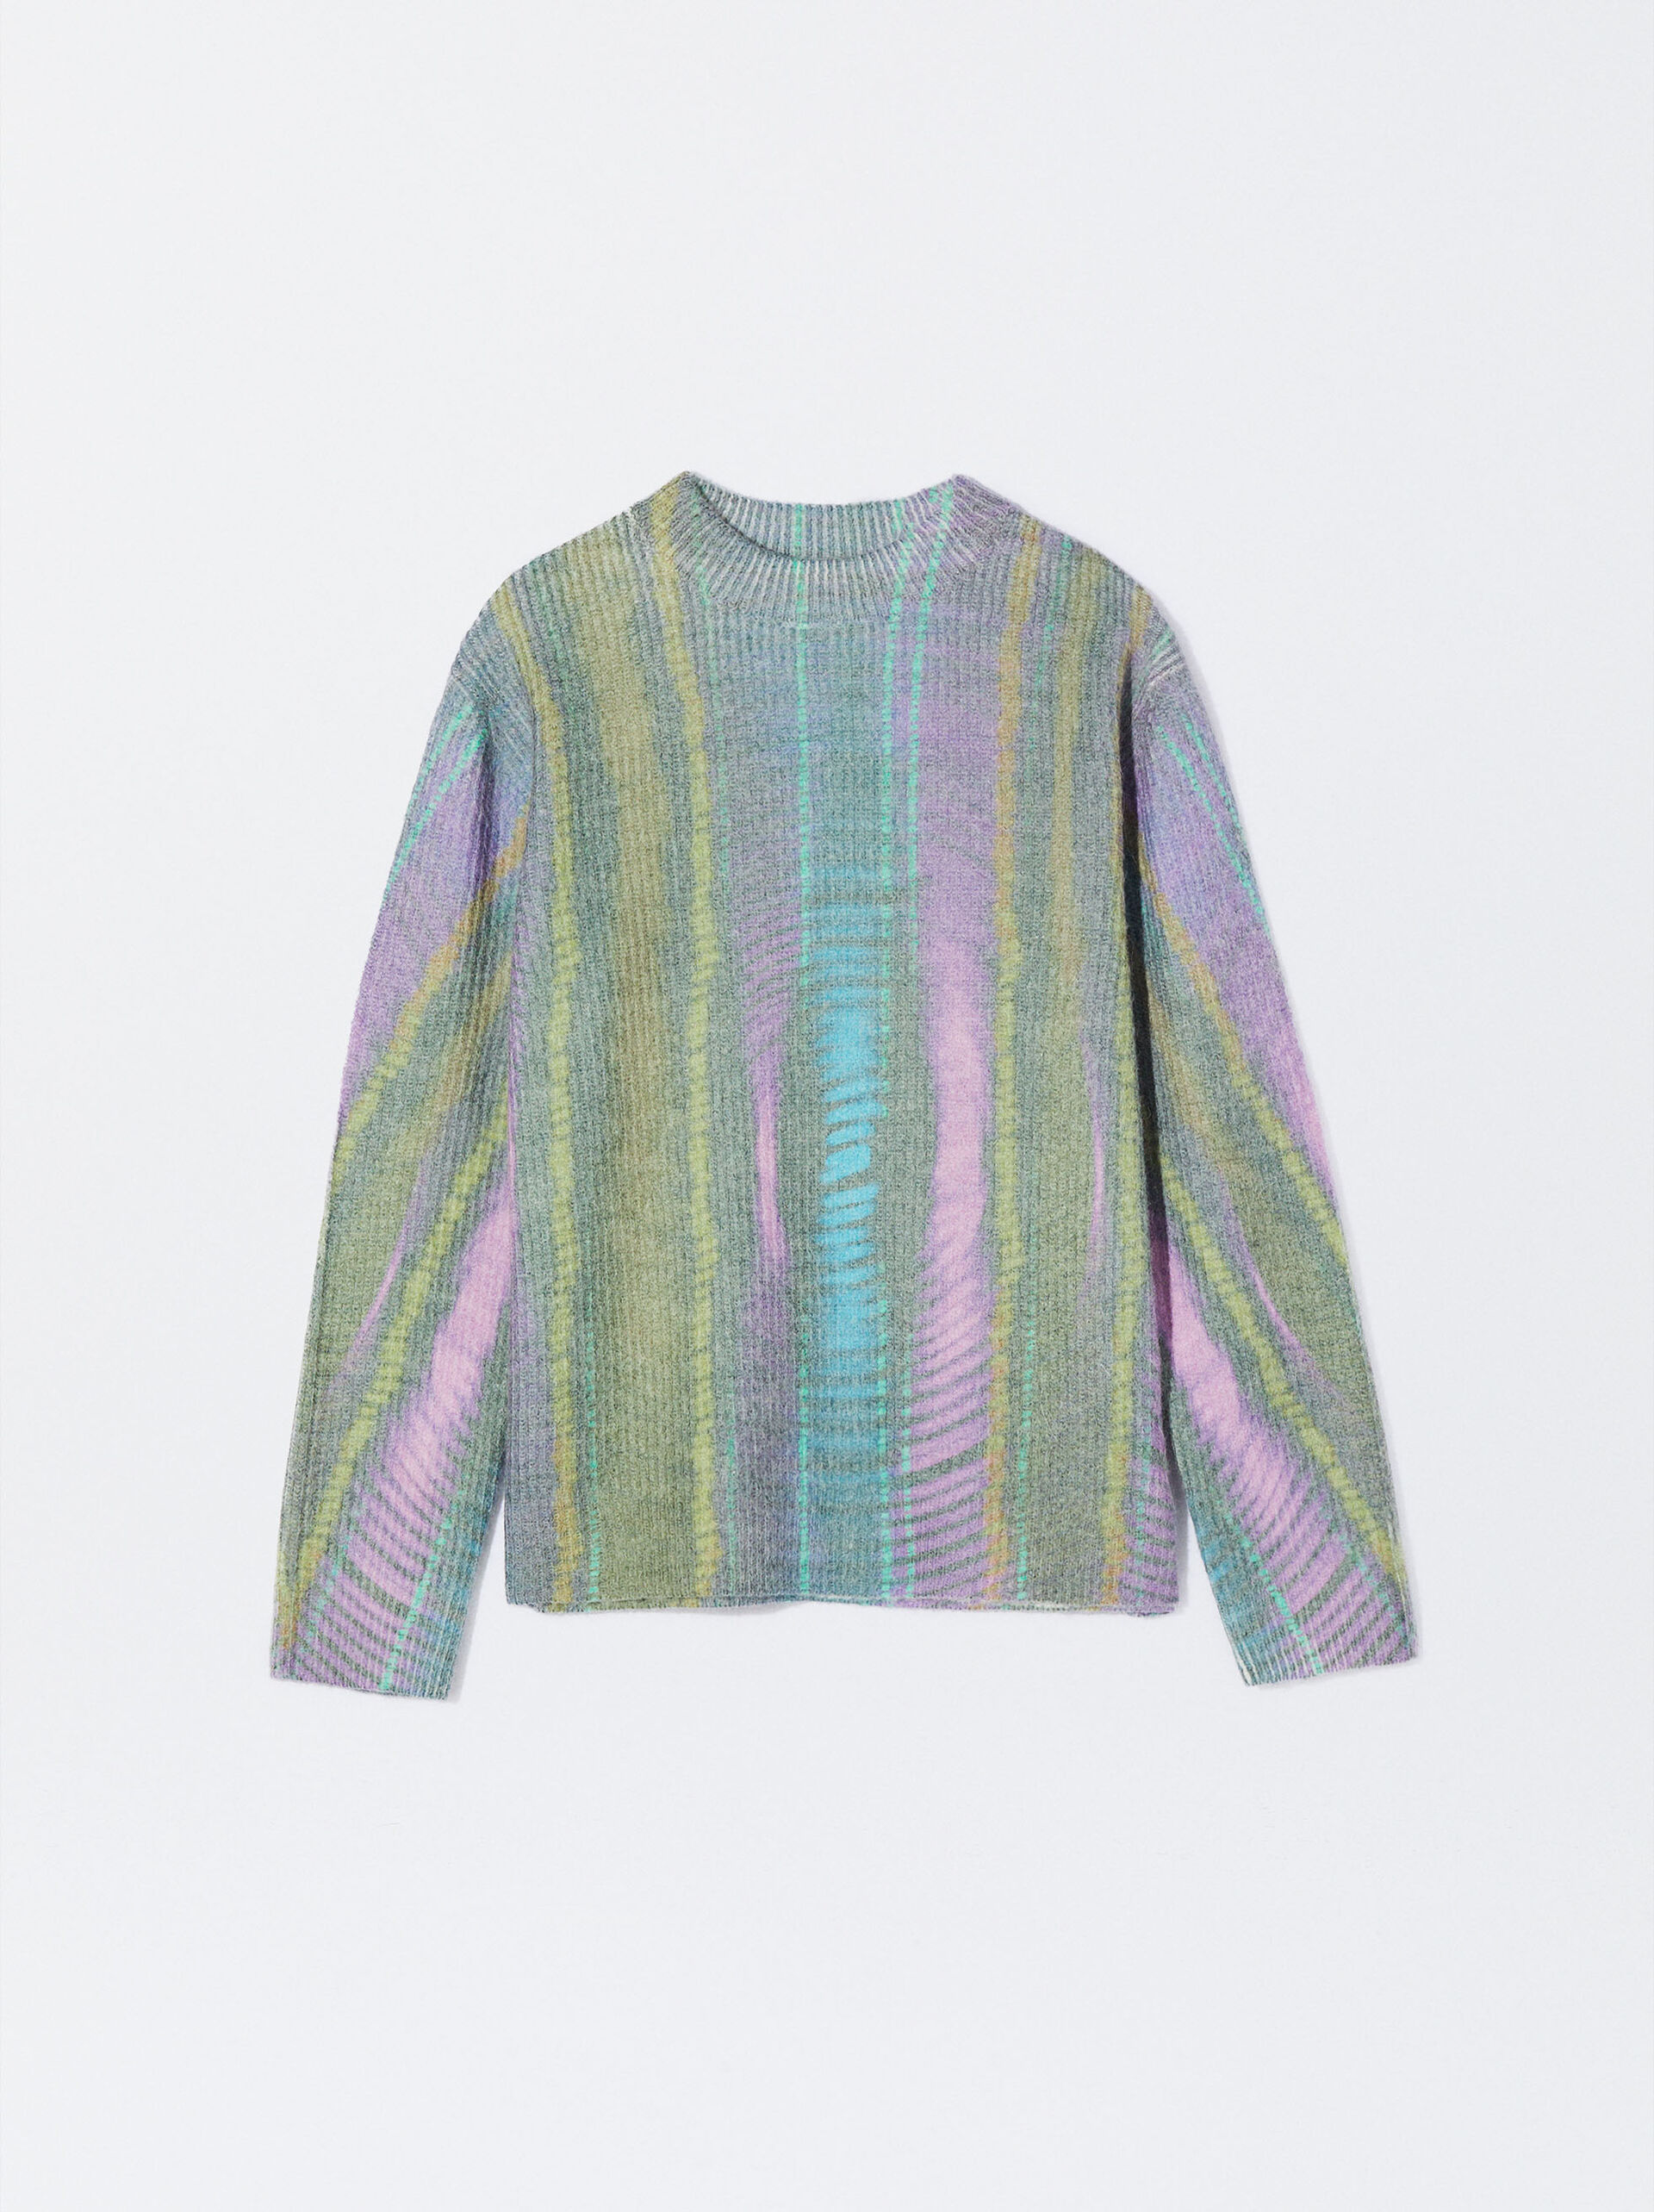 Printed Knit Sweater image number 5.0